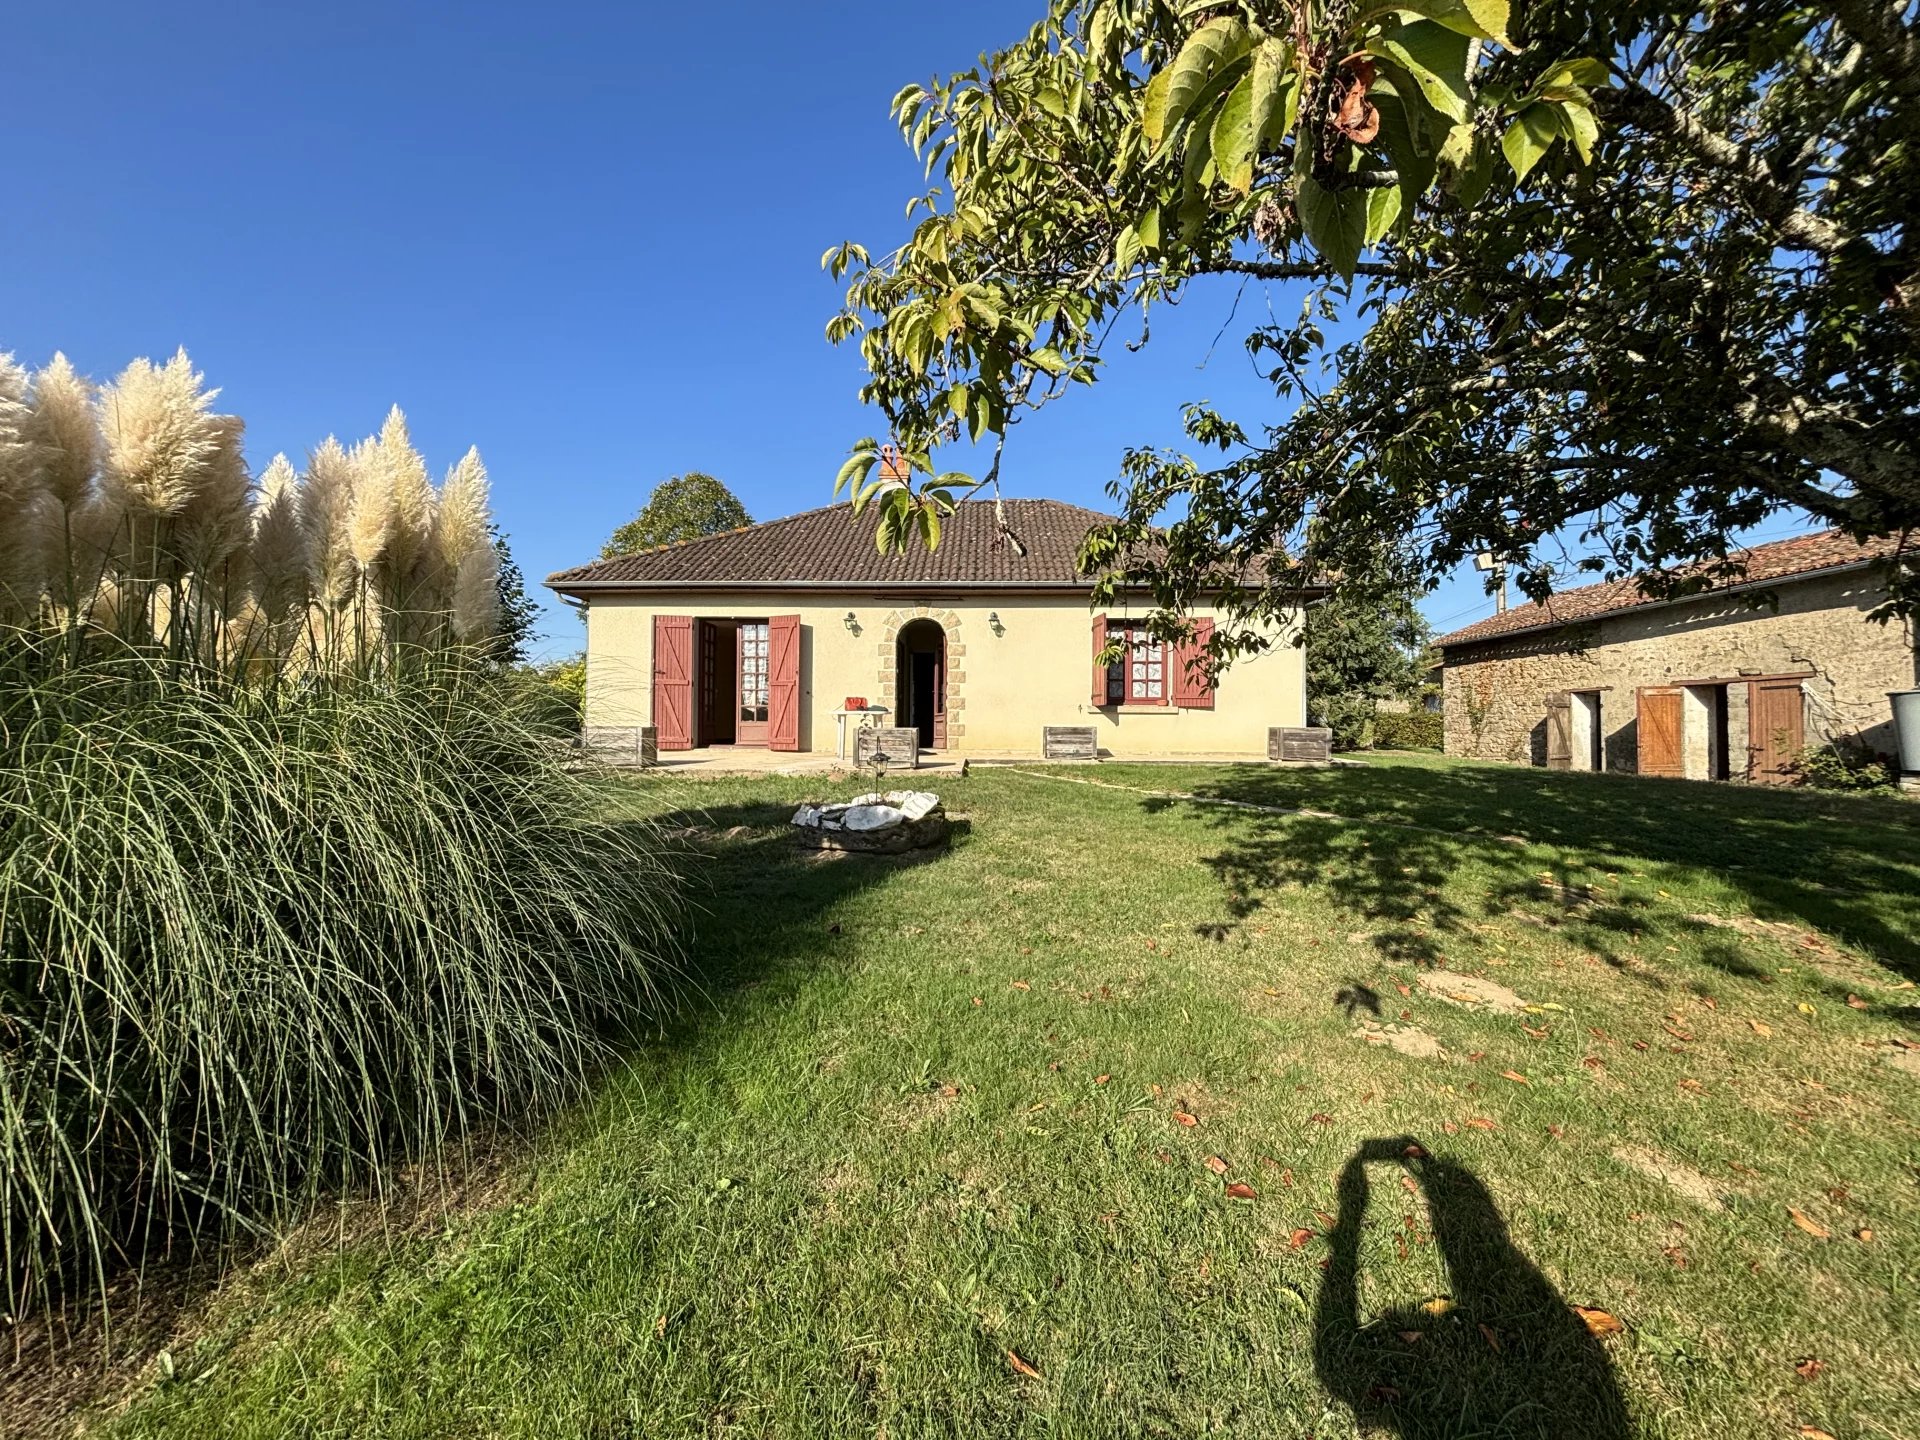 Single level house with stunning views and gîte potential